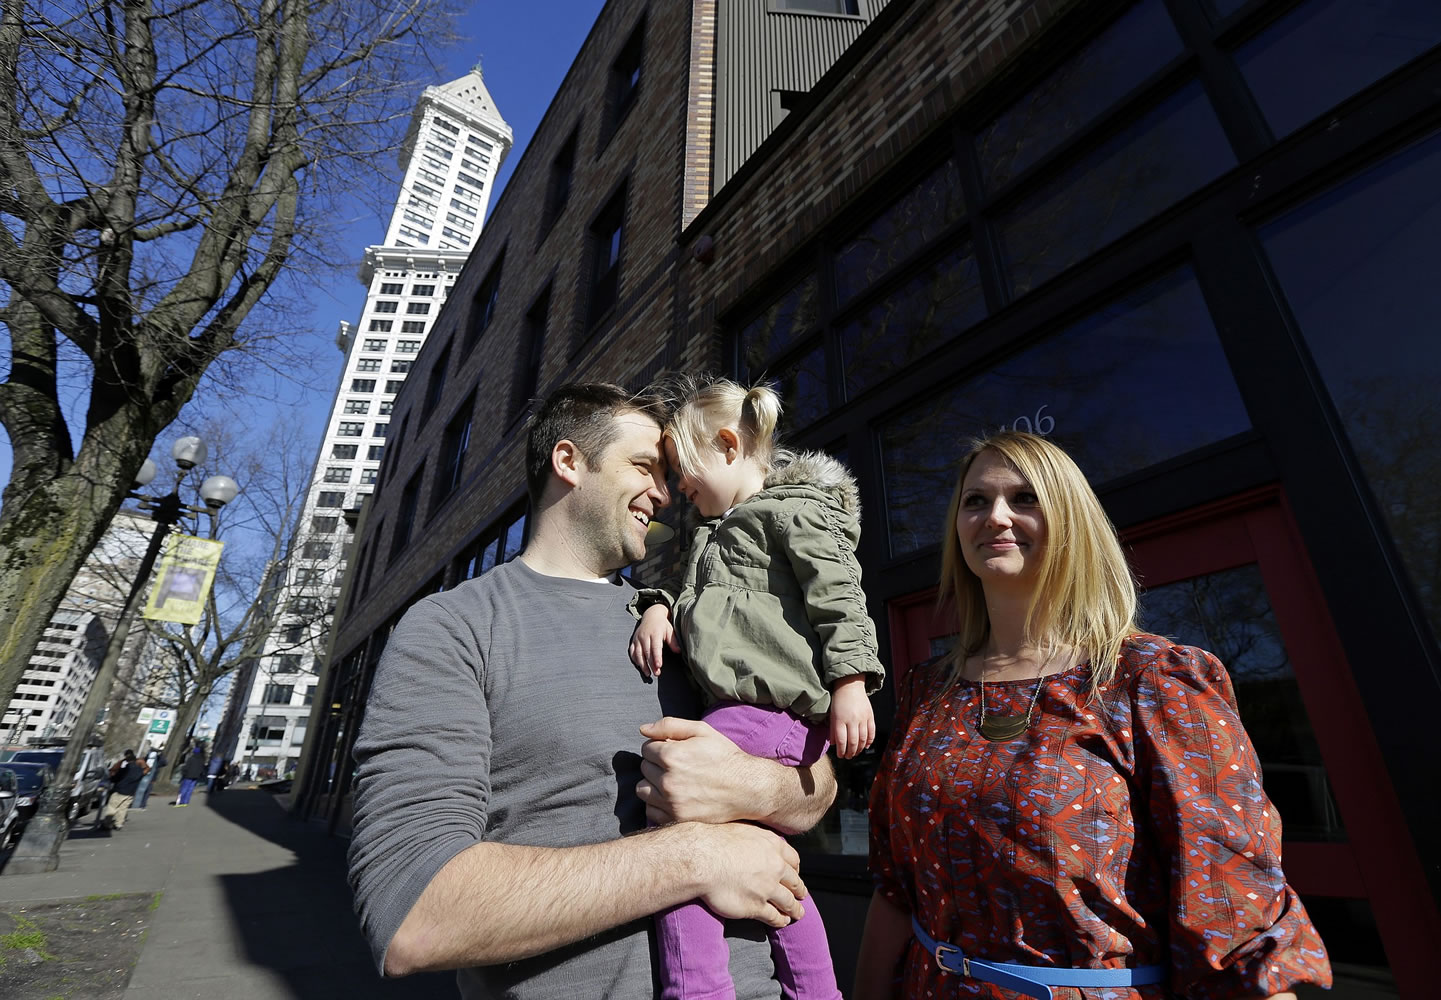 Jenny Kelly and her husband, Michael, share a smile with their daughter, Elea, 2, outside of their loft apartment building in Seattle's downtown Pioneer Square area.